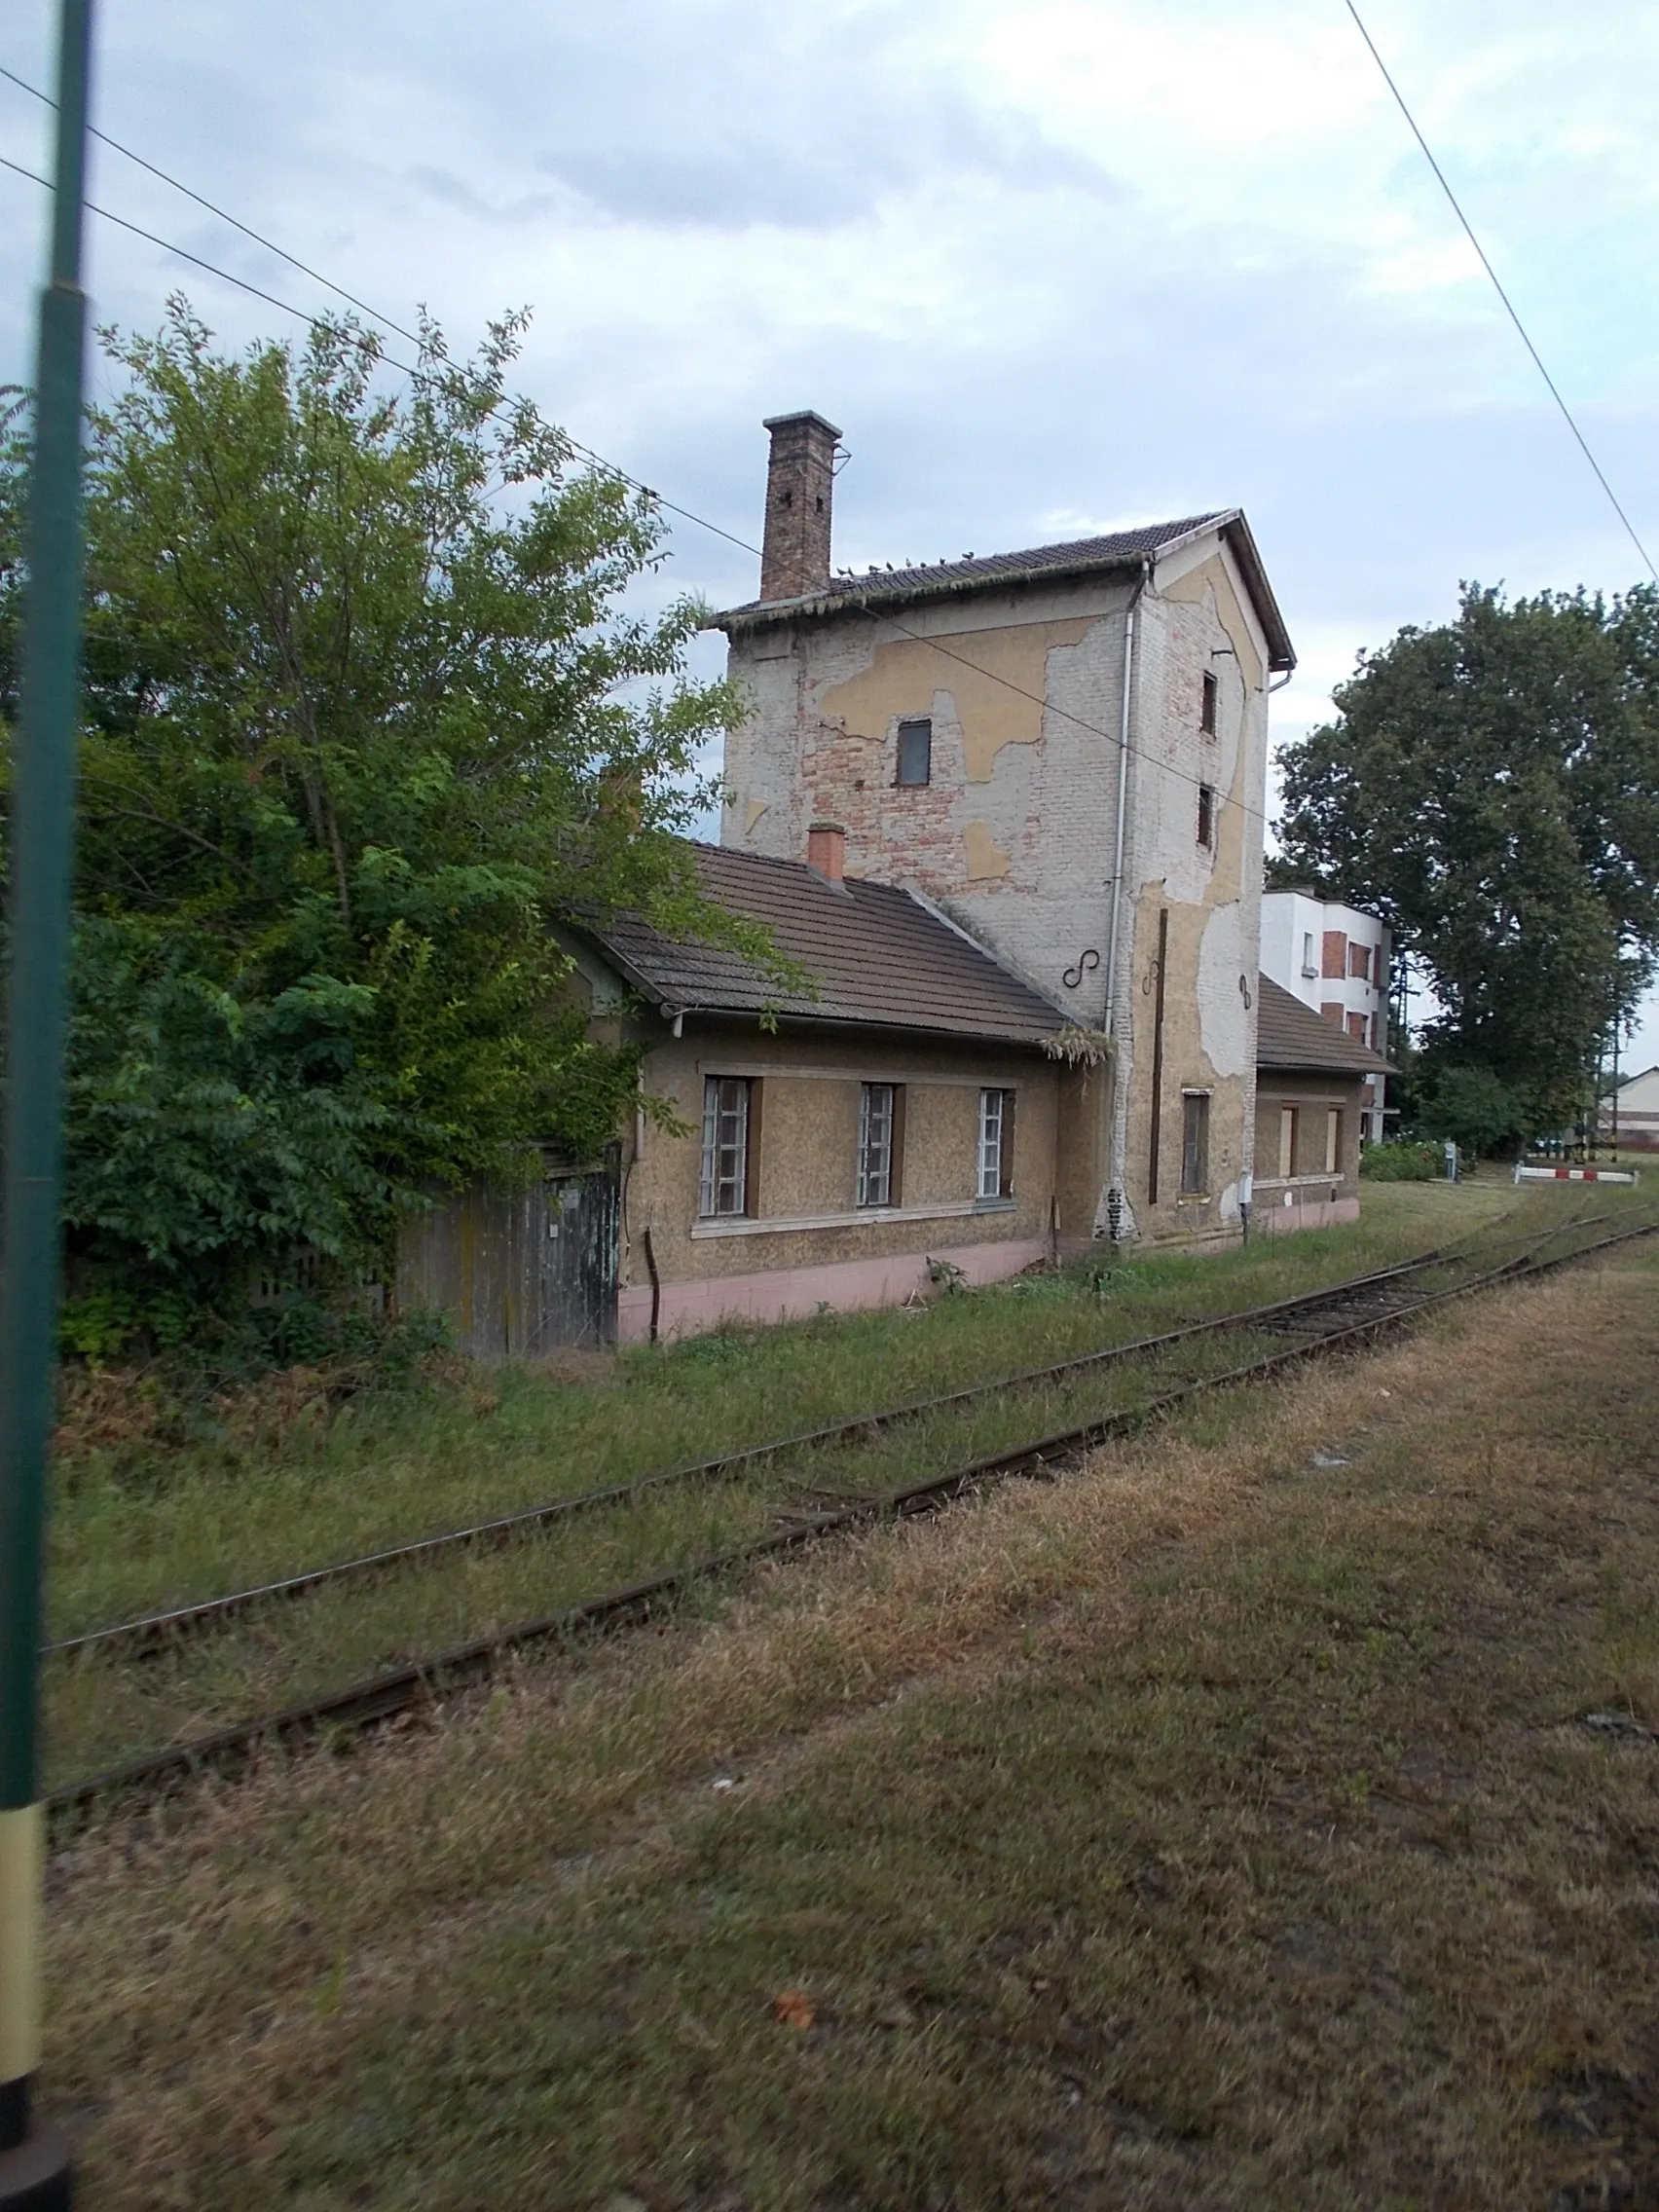 Photo showing: Railway station railway water (tanks and tower) building - Szatymaz, Csongrád-Csanád County, Hungary